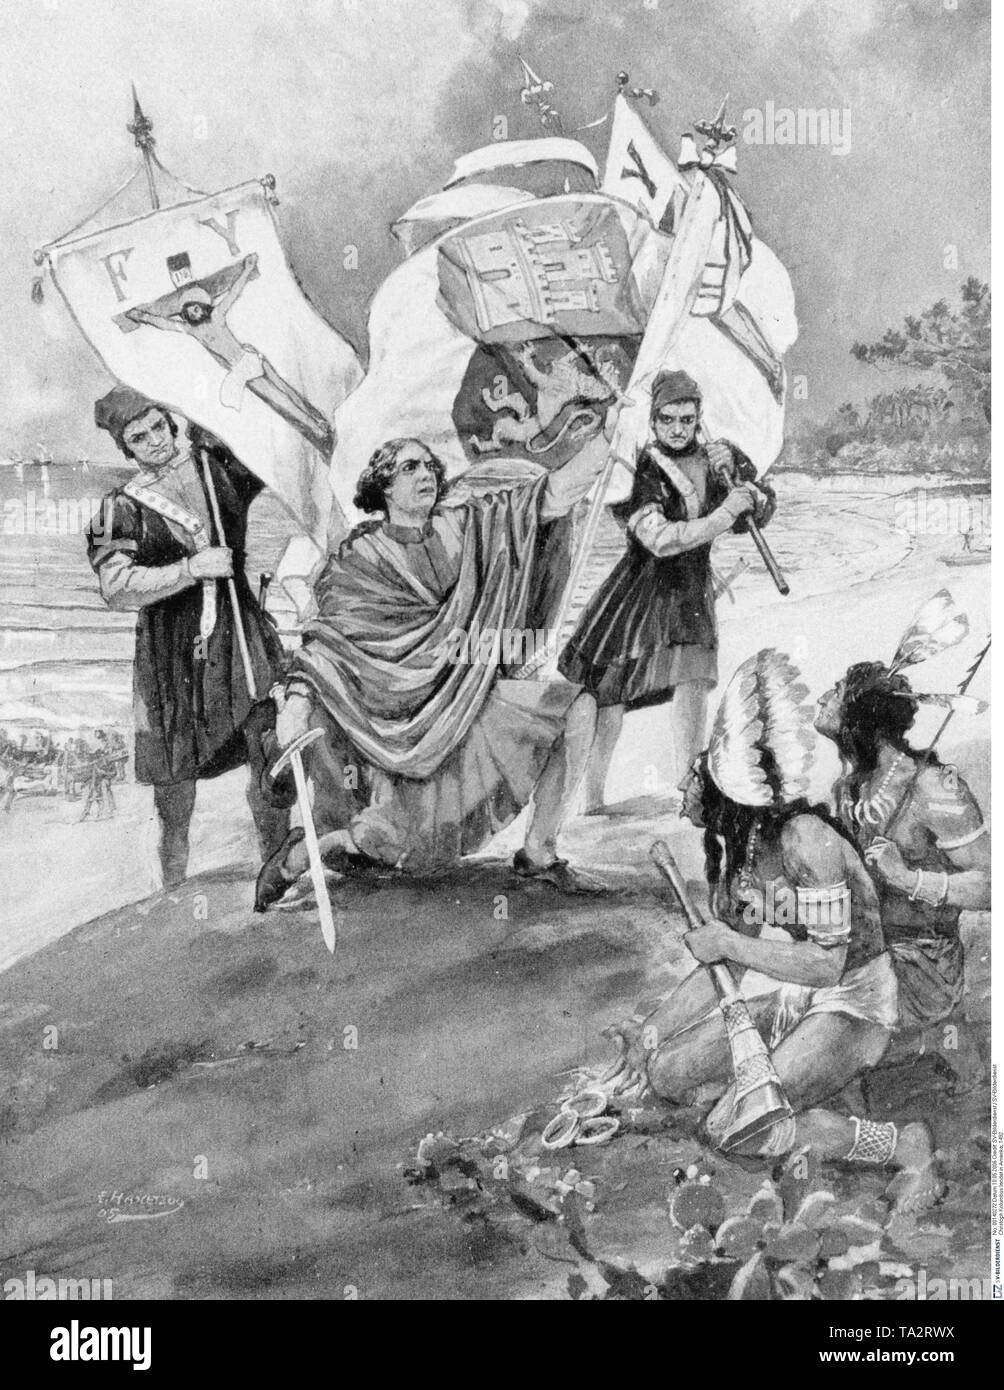 Italian navigator in the service of Spain, Christopher Columbus on his first landing in America. The illustration shows the welcome of Columbus and his Spanish crew by indians after landing on the Bahamian Island of San Salvador on October 12 1492 Stock Photo